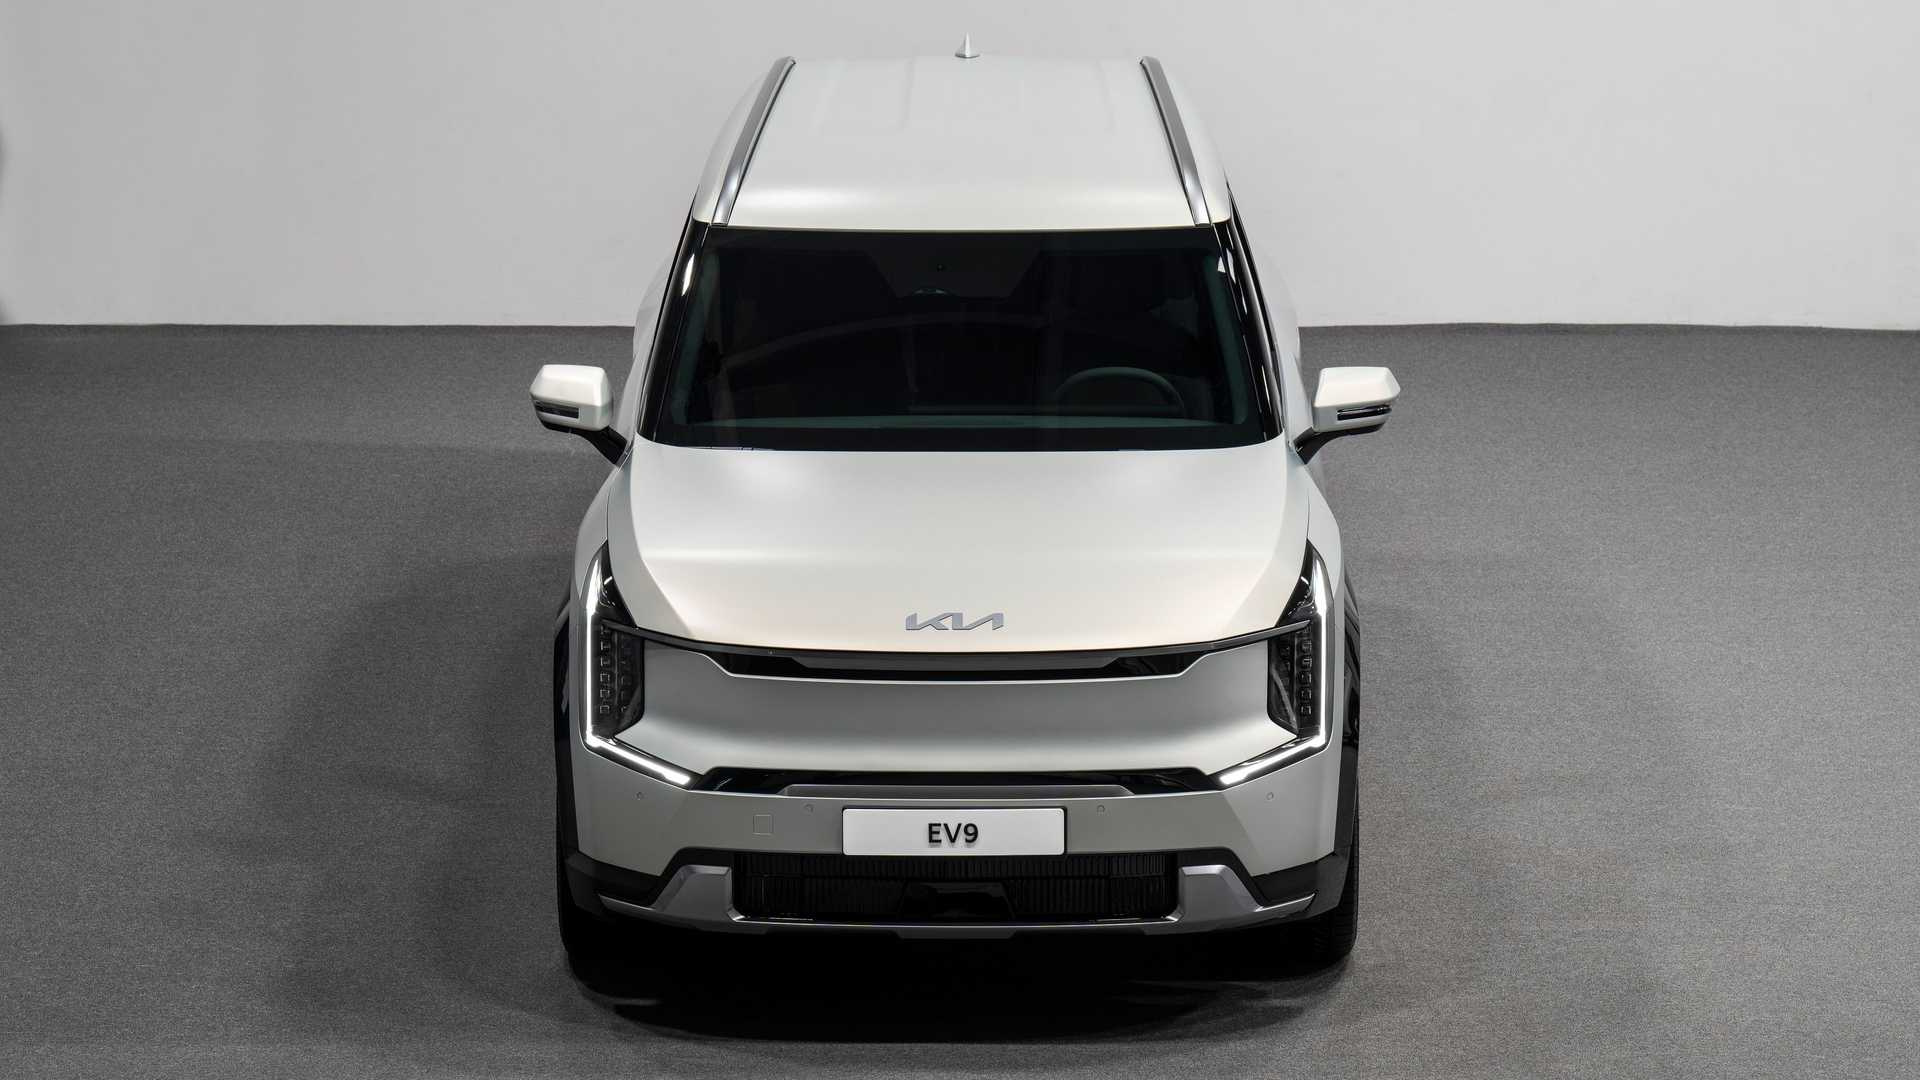 2024 kia ev9 revealed as electric telluride in first official images